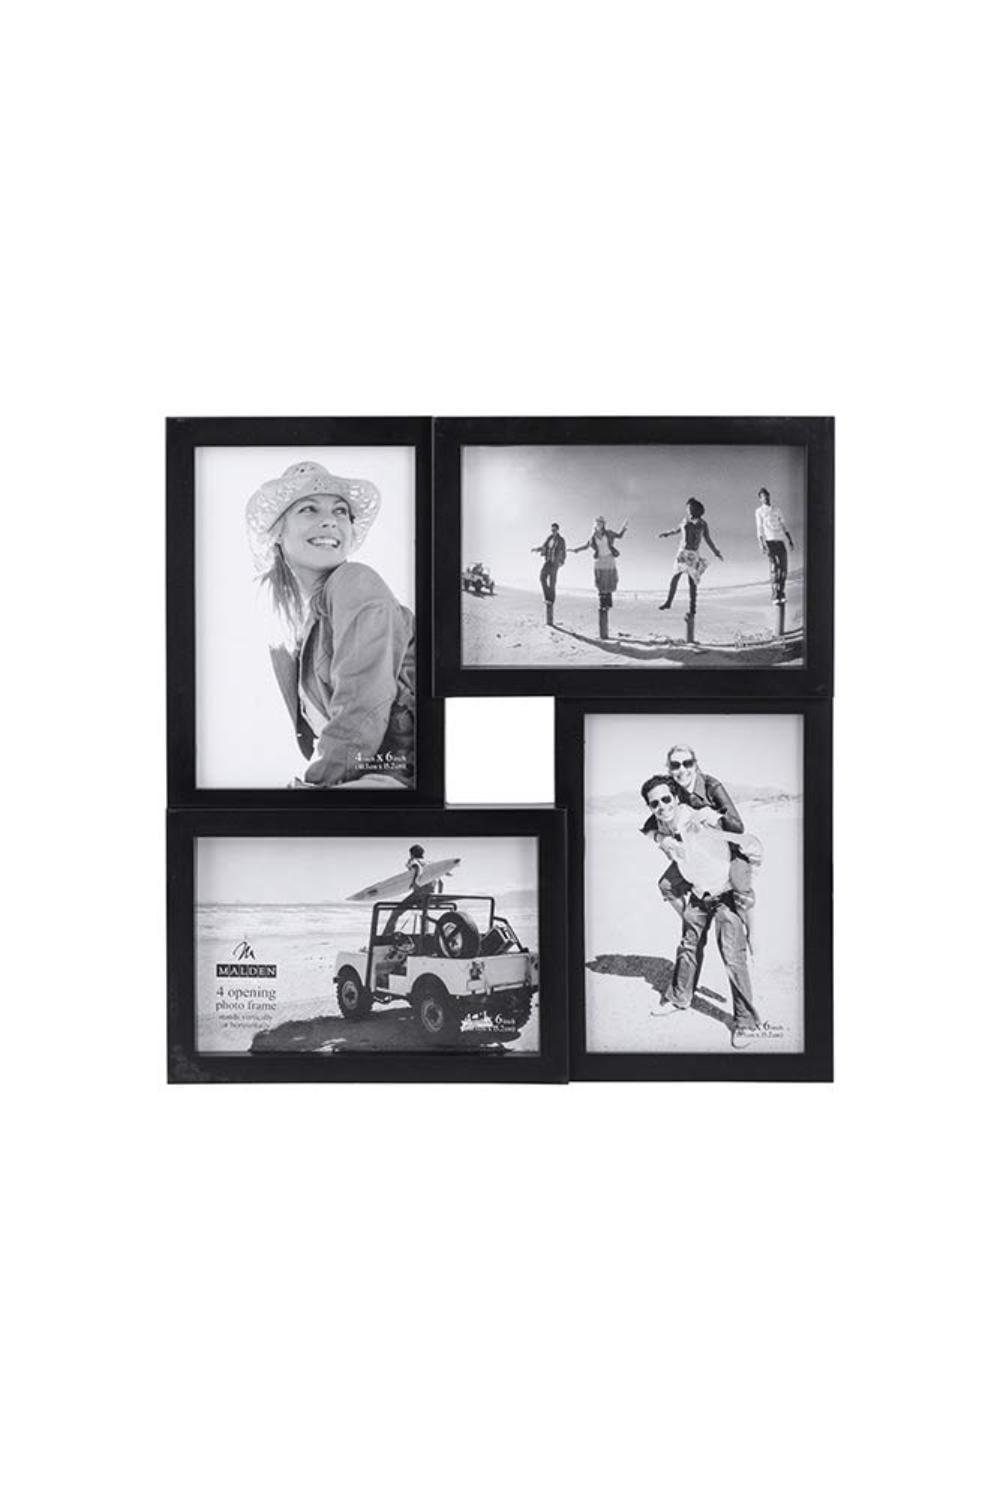 Malden 4x6 4-Opening Matted Collage Picture Frame Displays Four Black 